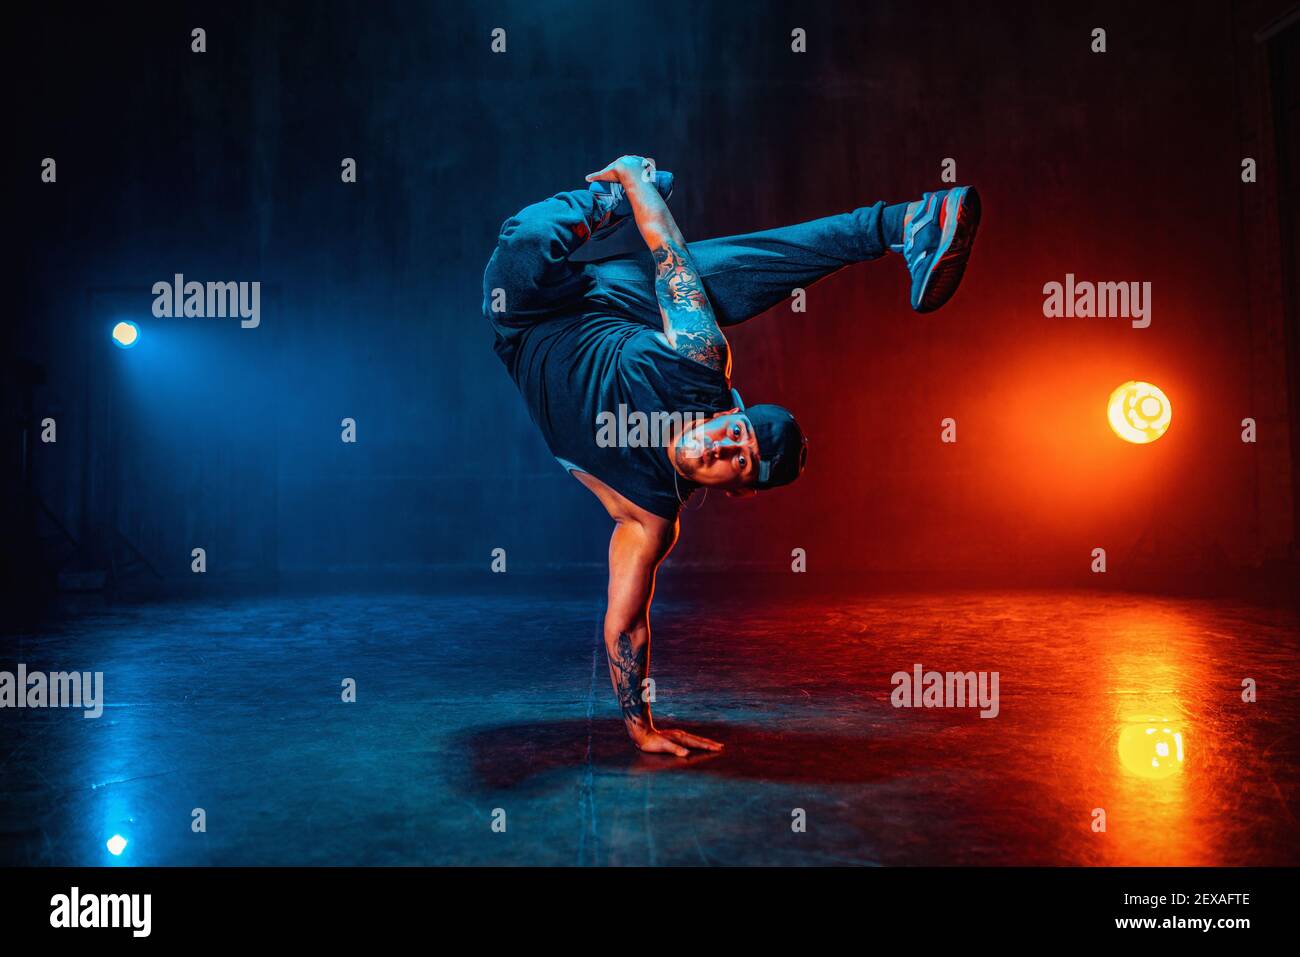 Young man break dancing in dark hall with blue and red lights. Tattoo on hands. Stock Photo